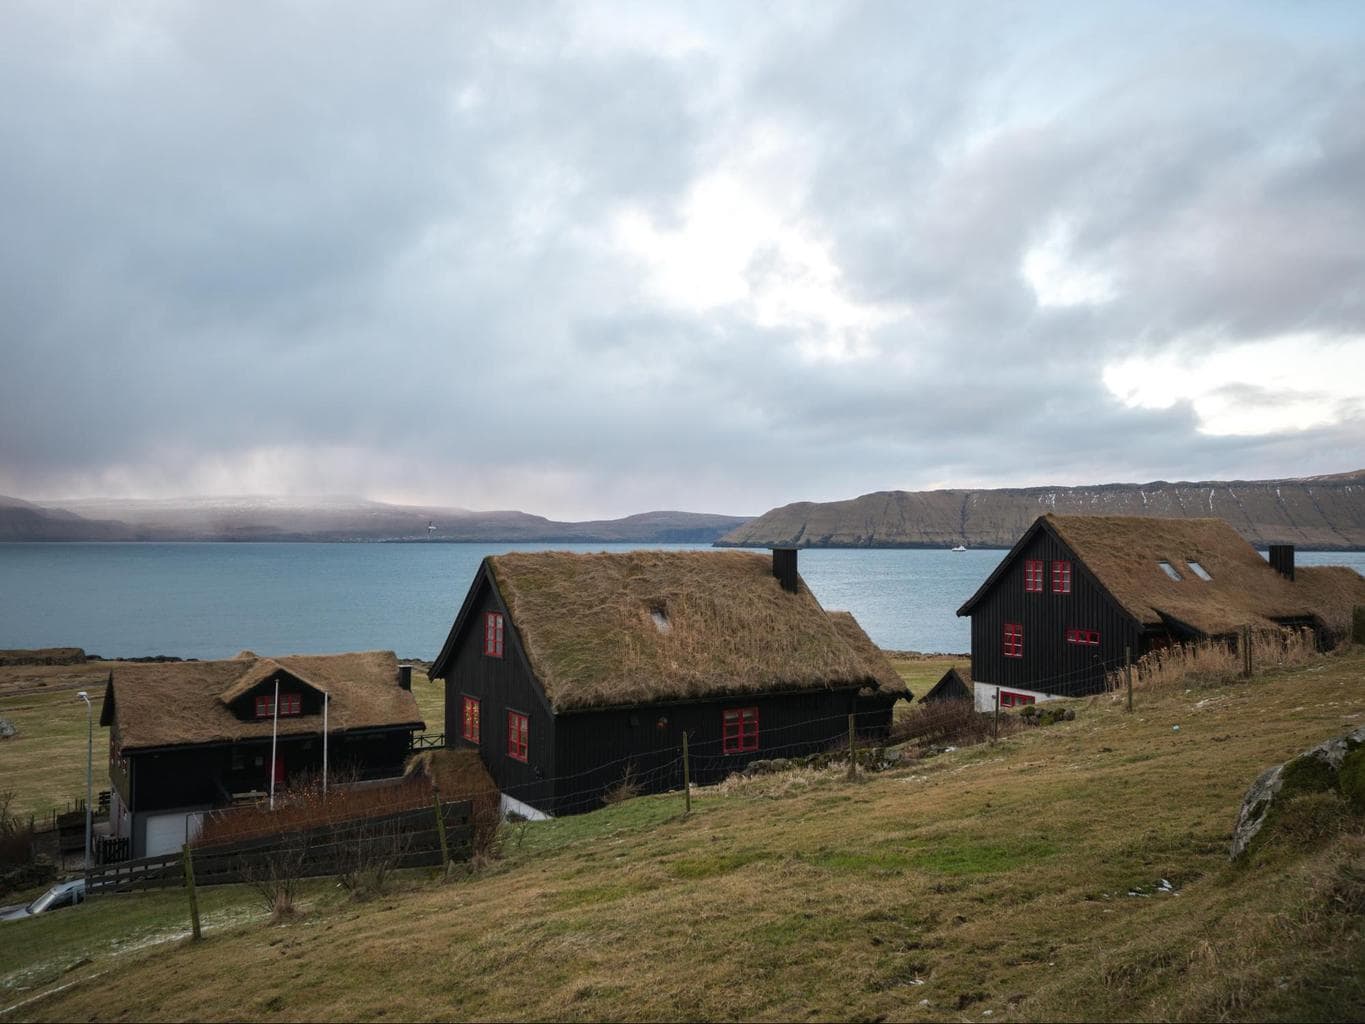 Moss covered houses in Faroes Islands